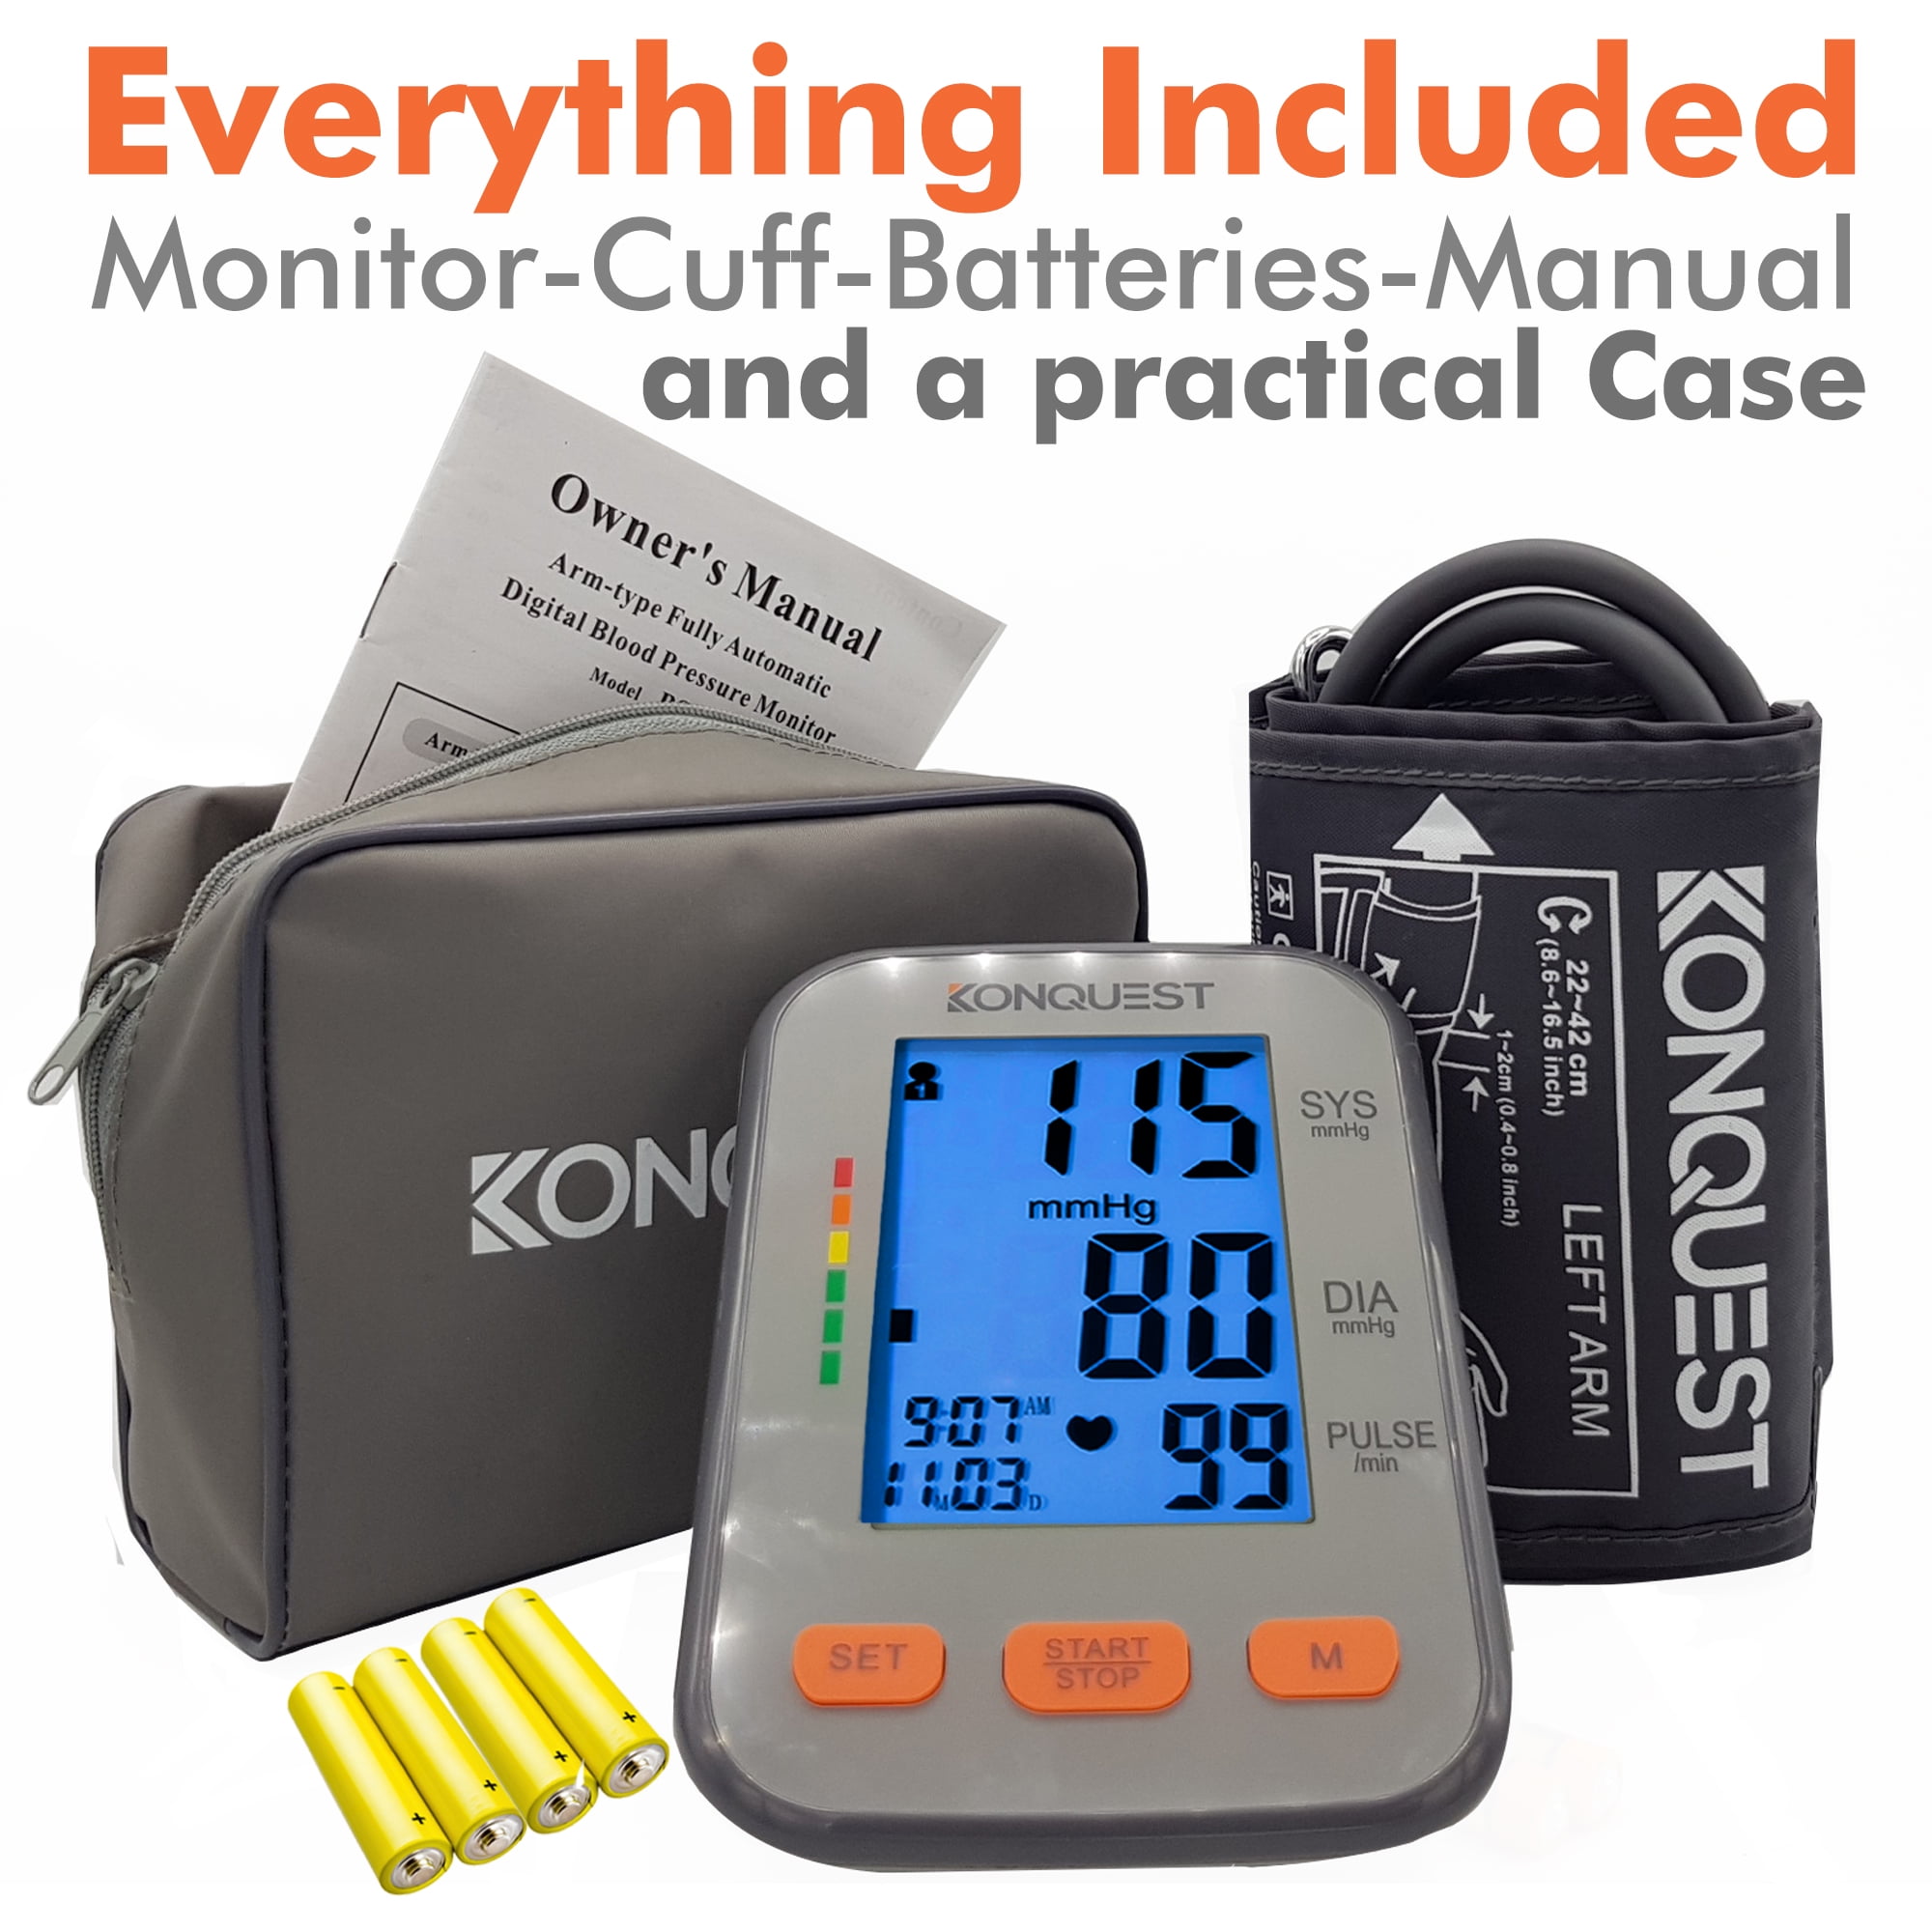 Konquest KBP-2910W Automatic Wrist Blood Pressure Monitor - Accurate -  Adjustable Cuff, Large Screen Display - Portable Case